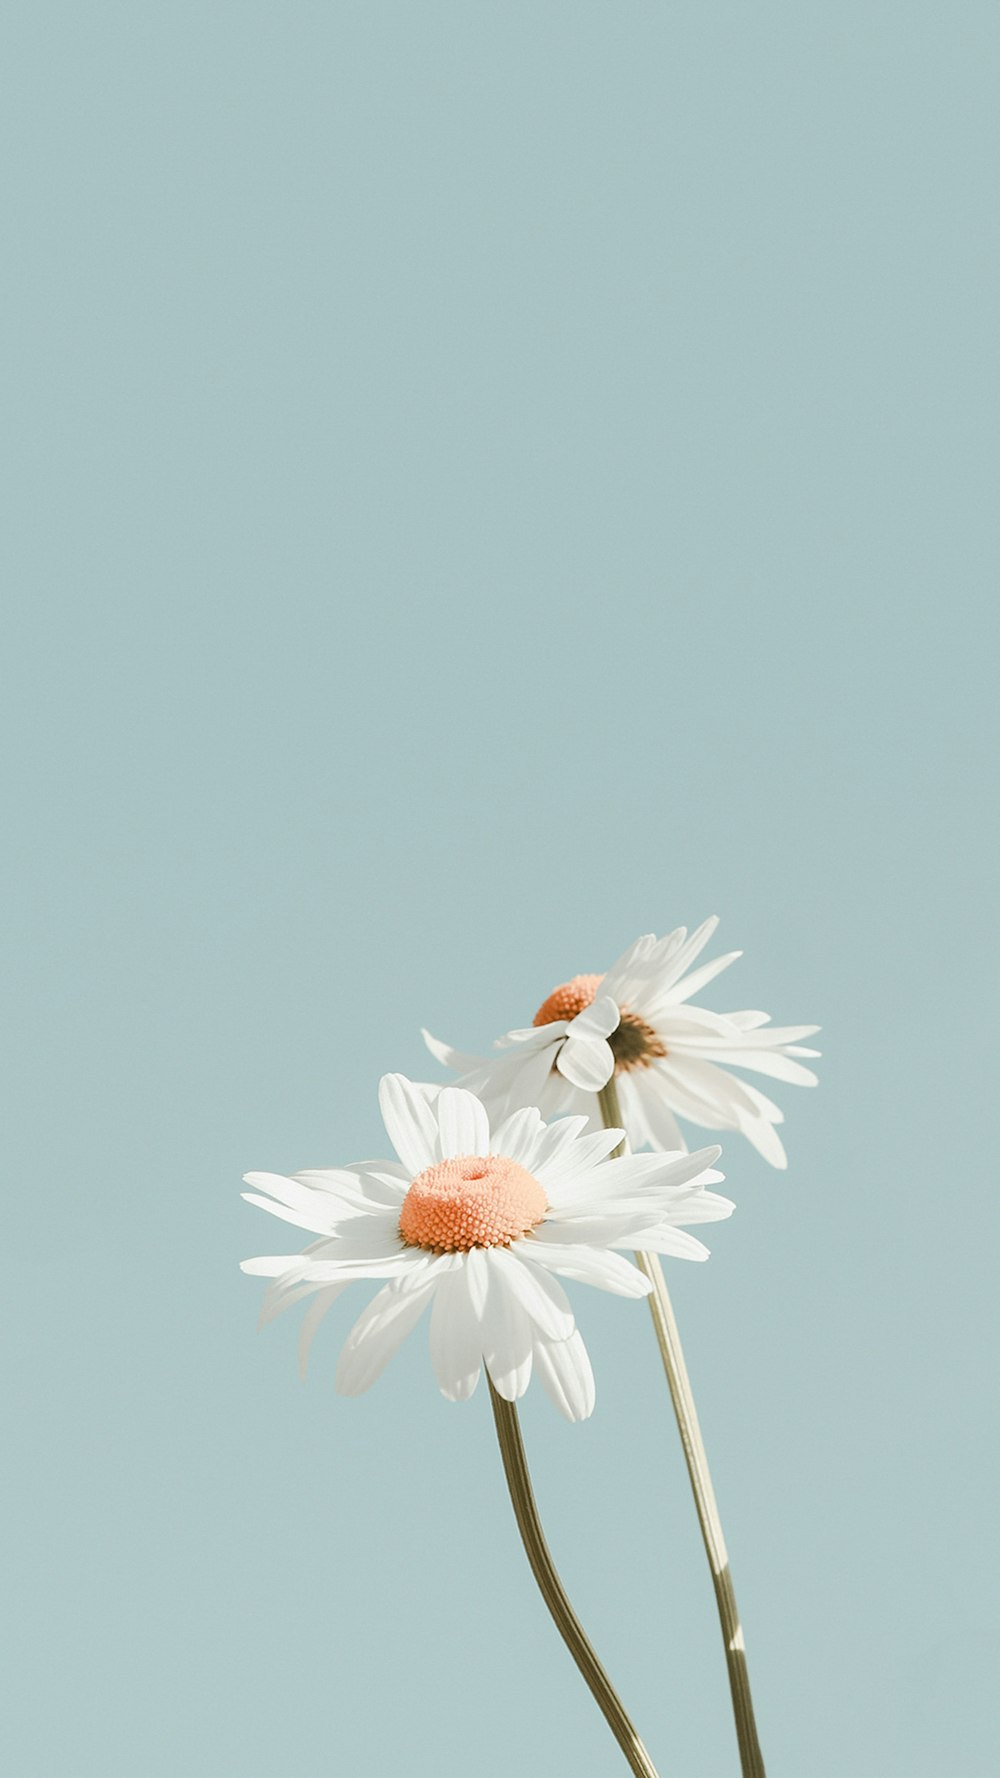 three daisies in a vase against a blue sky